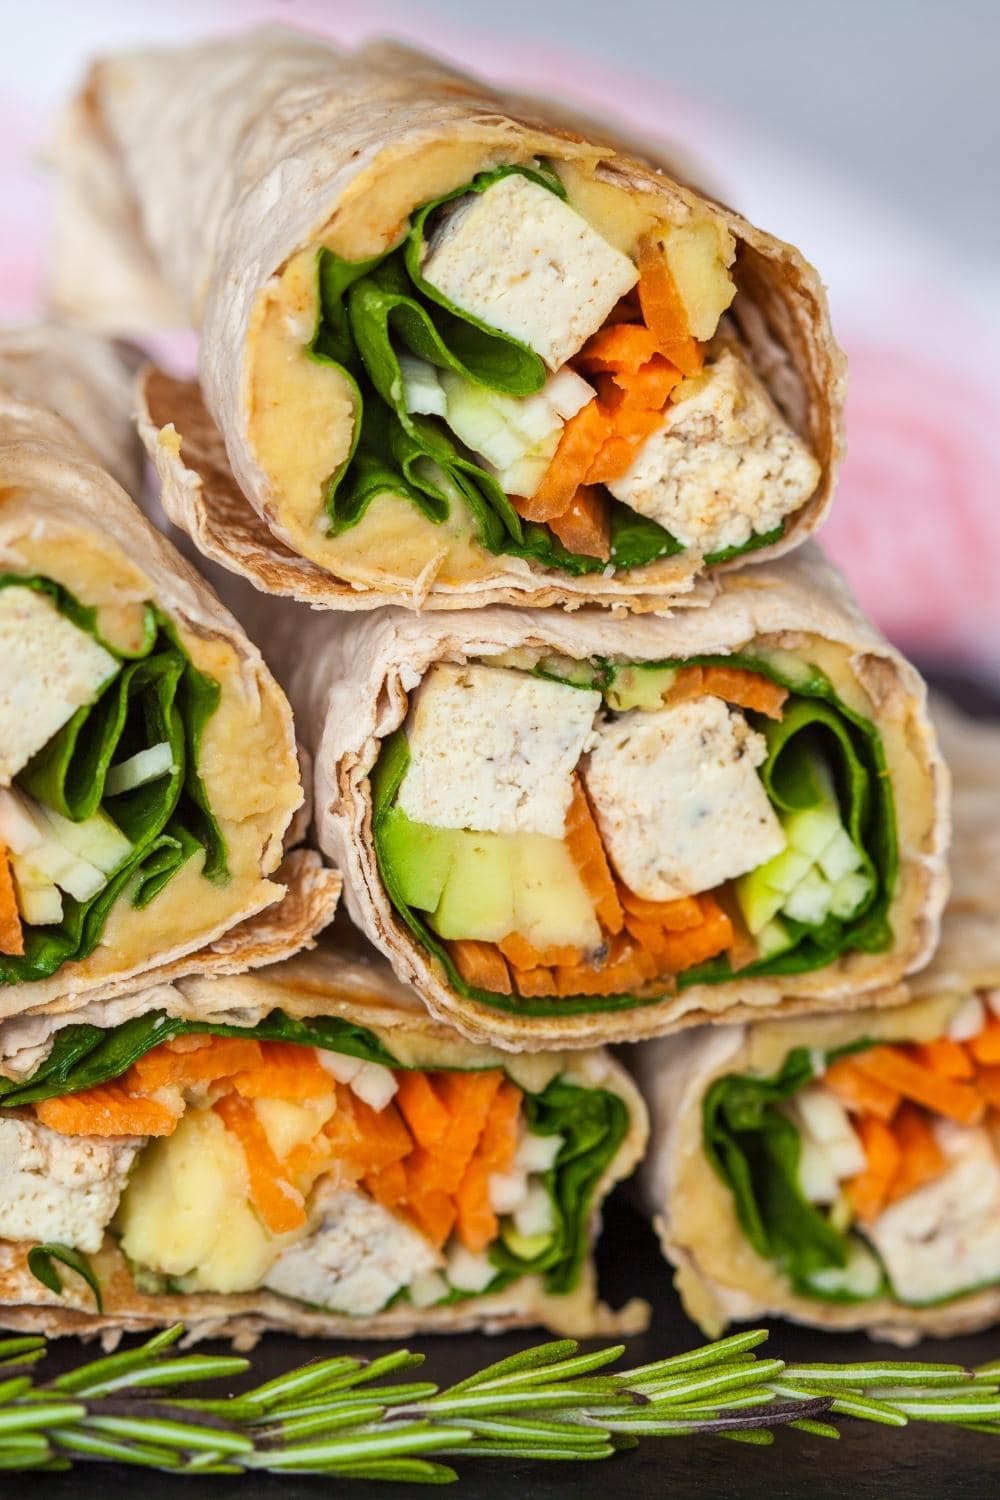 37 Easy Vegan Lunch Ideas (Quick & Healthy) - Insanely Good